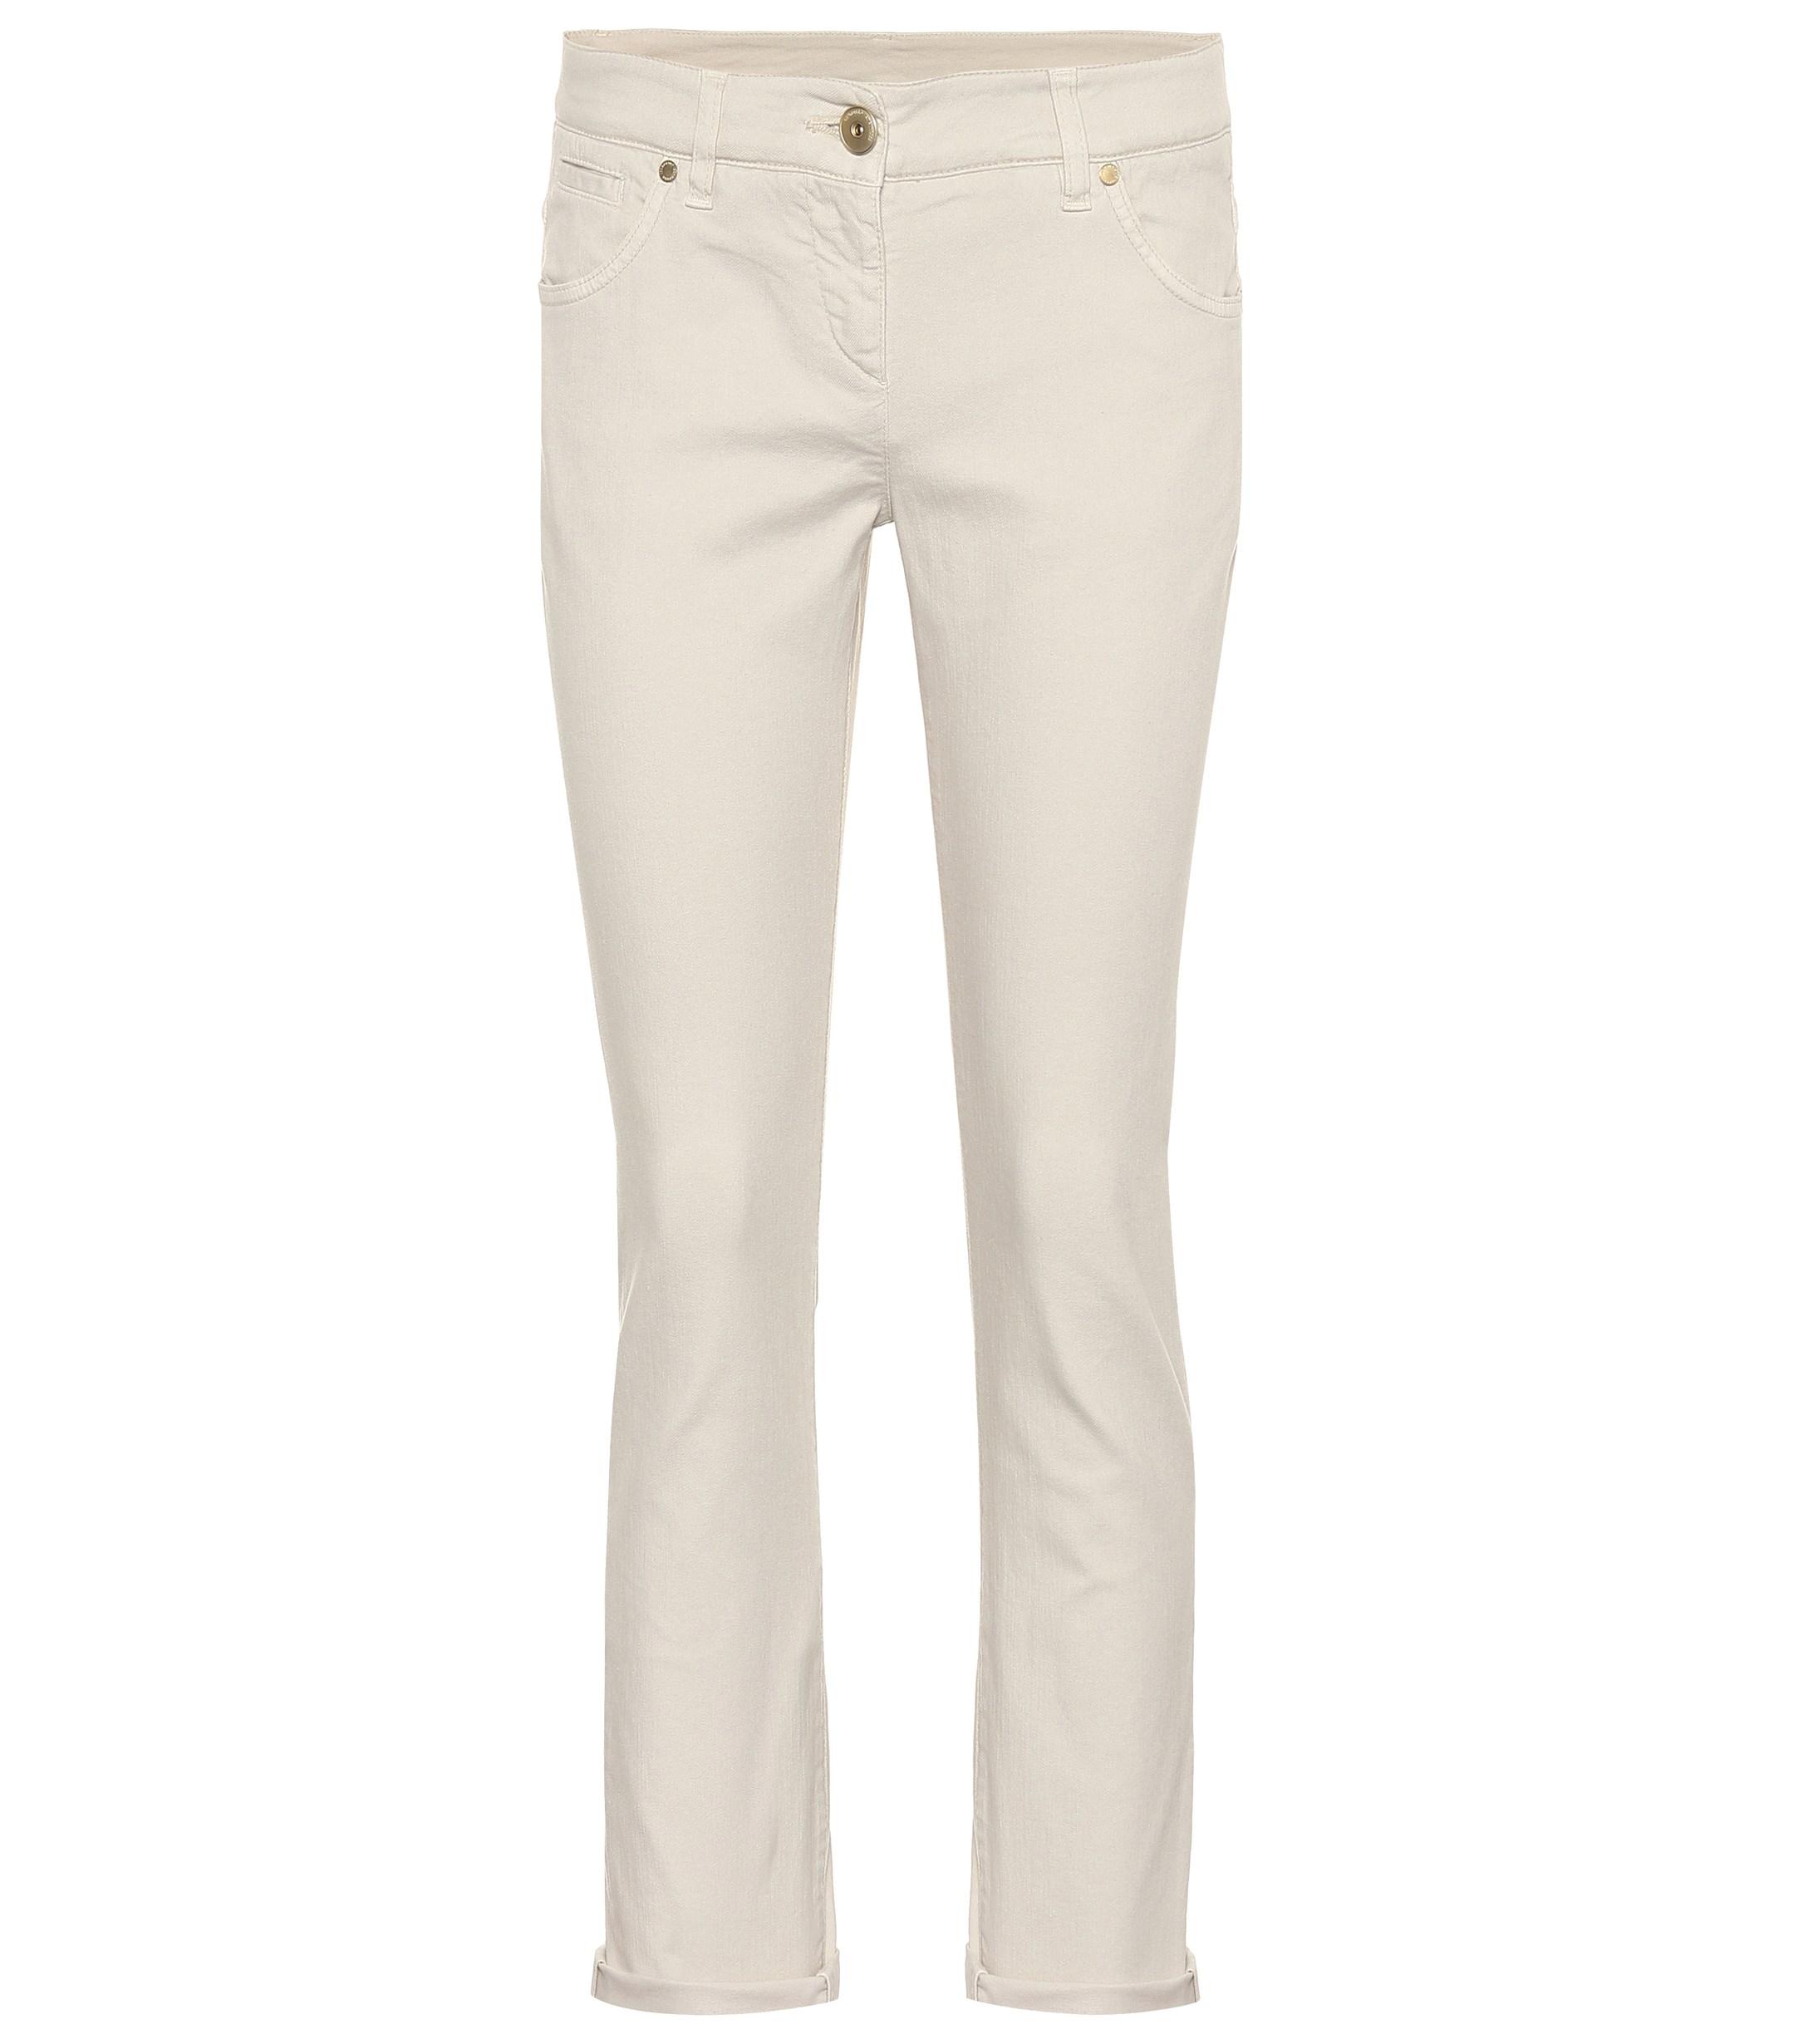 Lyst - Brunello Cucinelli Mid-rise Straight Jeans in White